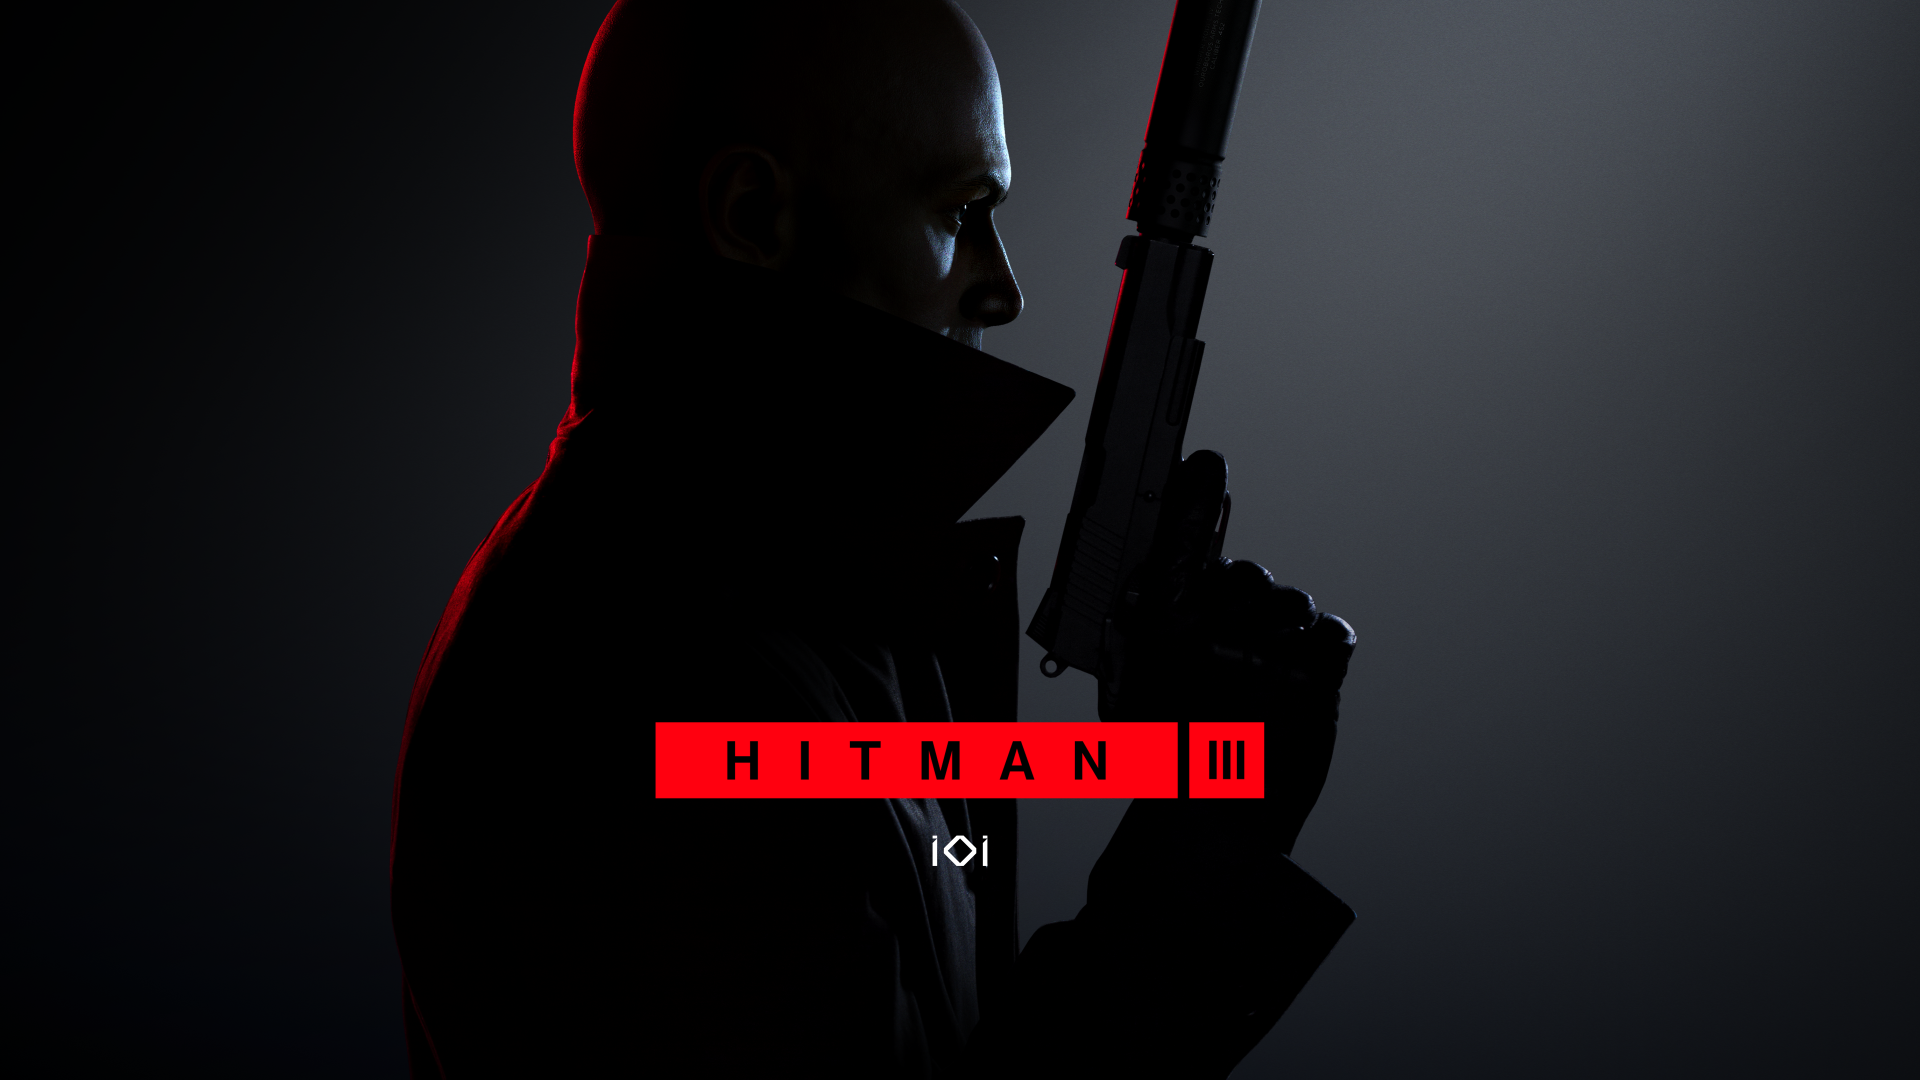 Hitman 3 HD Wallpaper and Background Image